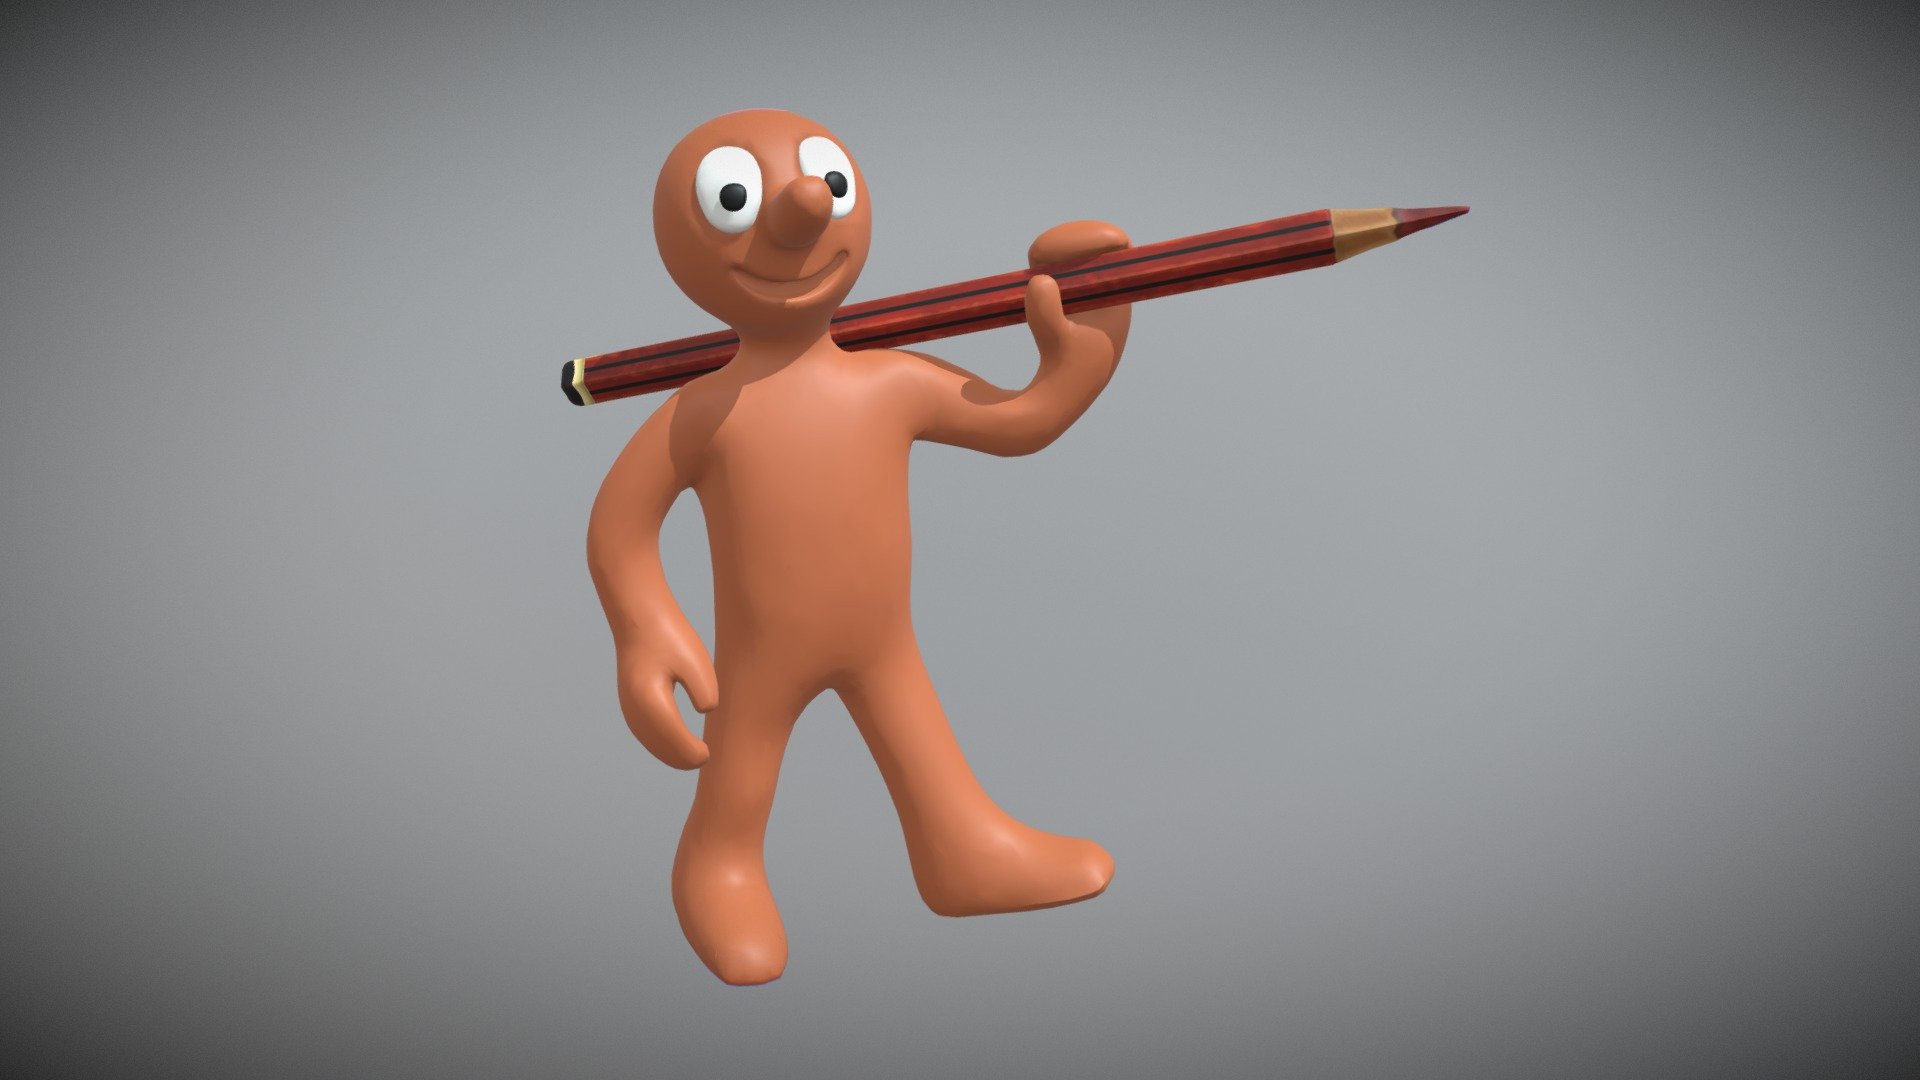 Morph and the Pencil